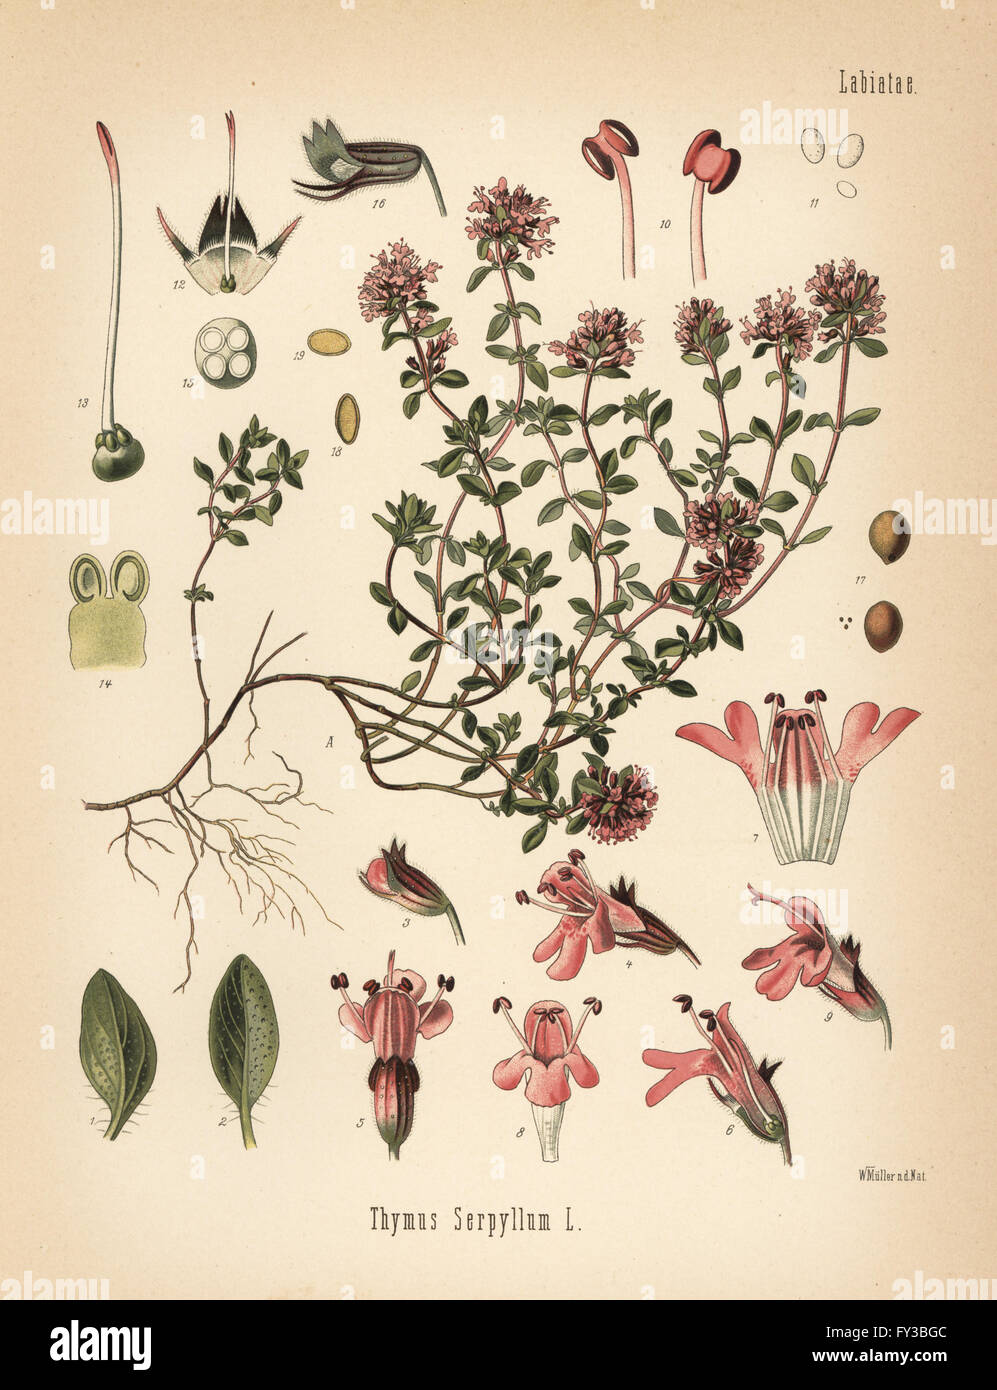 Breckland thyme or wild thyme, Thymus serpyllum. Chromolithograph after a botanical illustration by Walther Muller from Hermann Adolph Koehler's Medicinal Plants, edited by Gustav Pabst, Koehler, Germany, 1887. Stock Photo